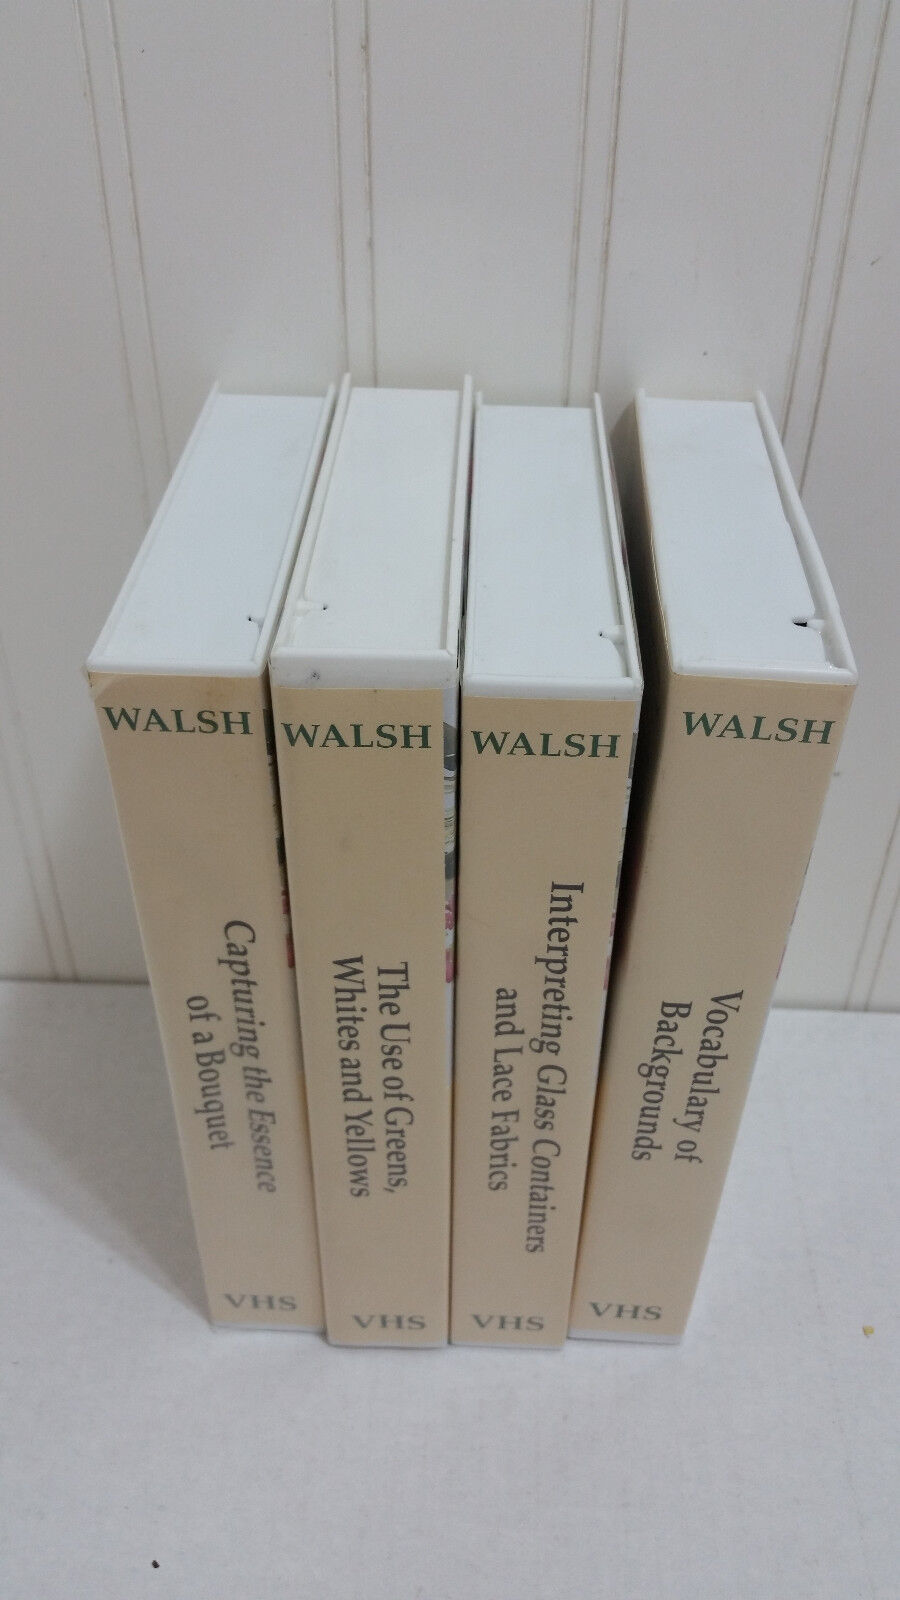 WATERCOLOR WITH JANET WALSH Complete Set 4 VHS Tapes Painting Instruction Videos Popularność 2022